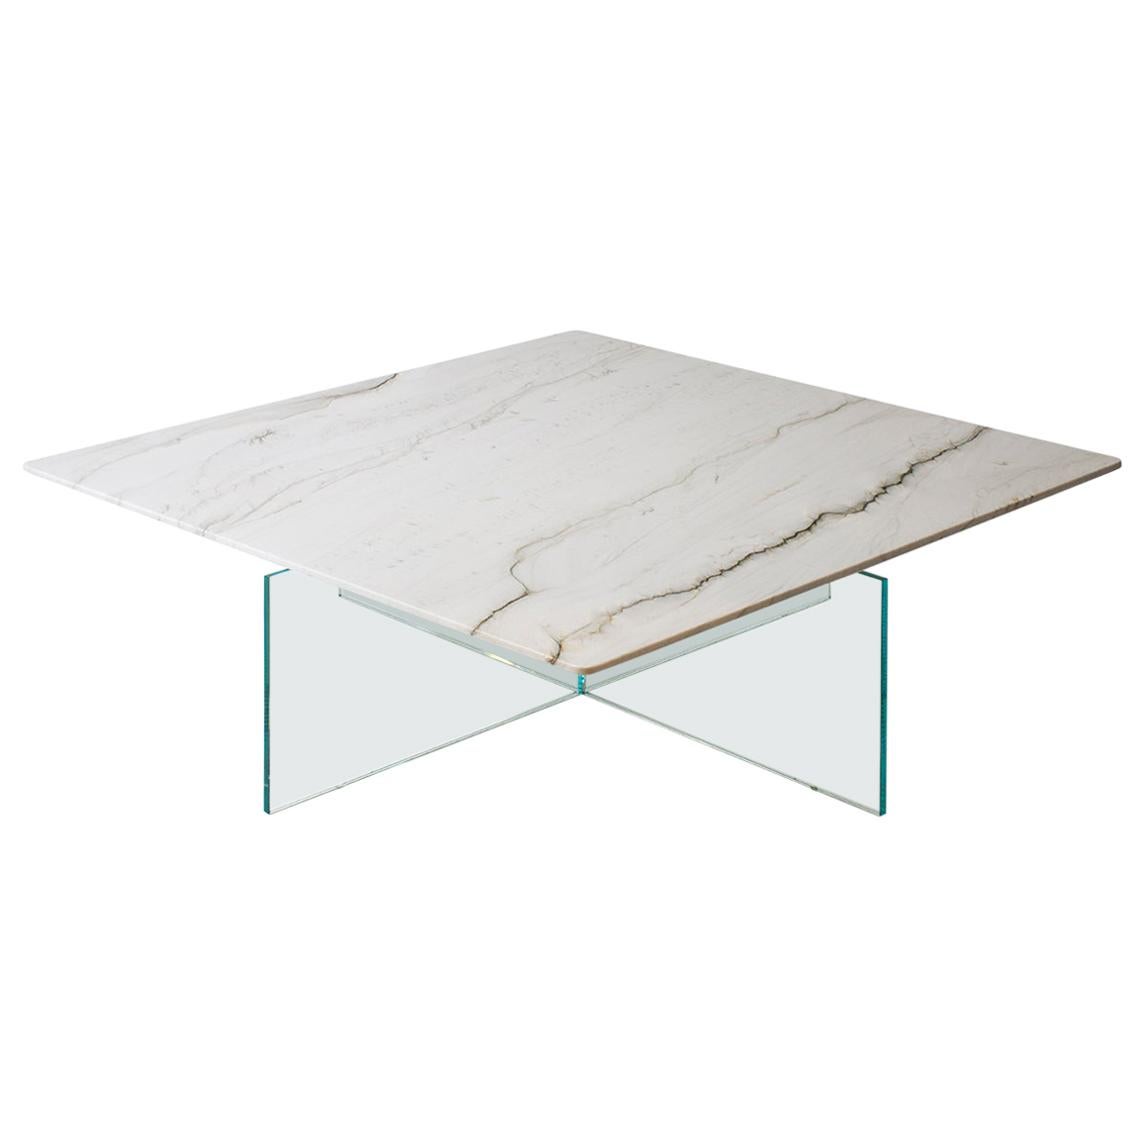 Claste Beside Myself Medium Coffee Table in Cararra Classico Marble with Glass